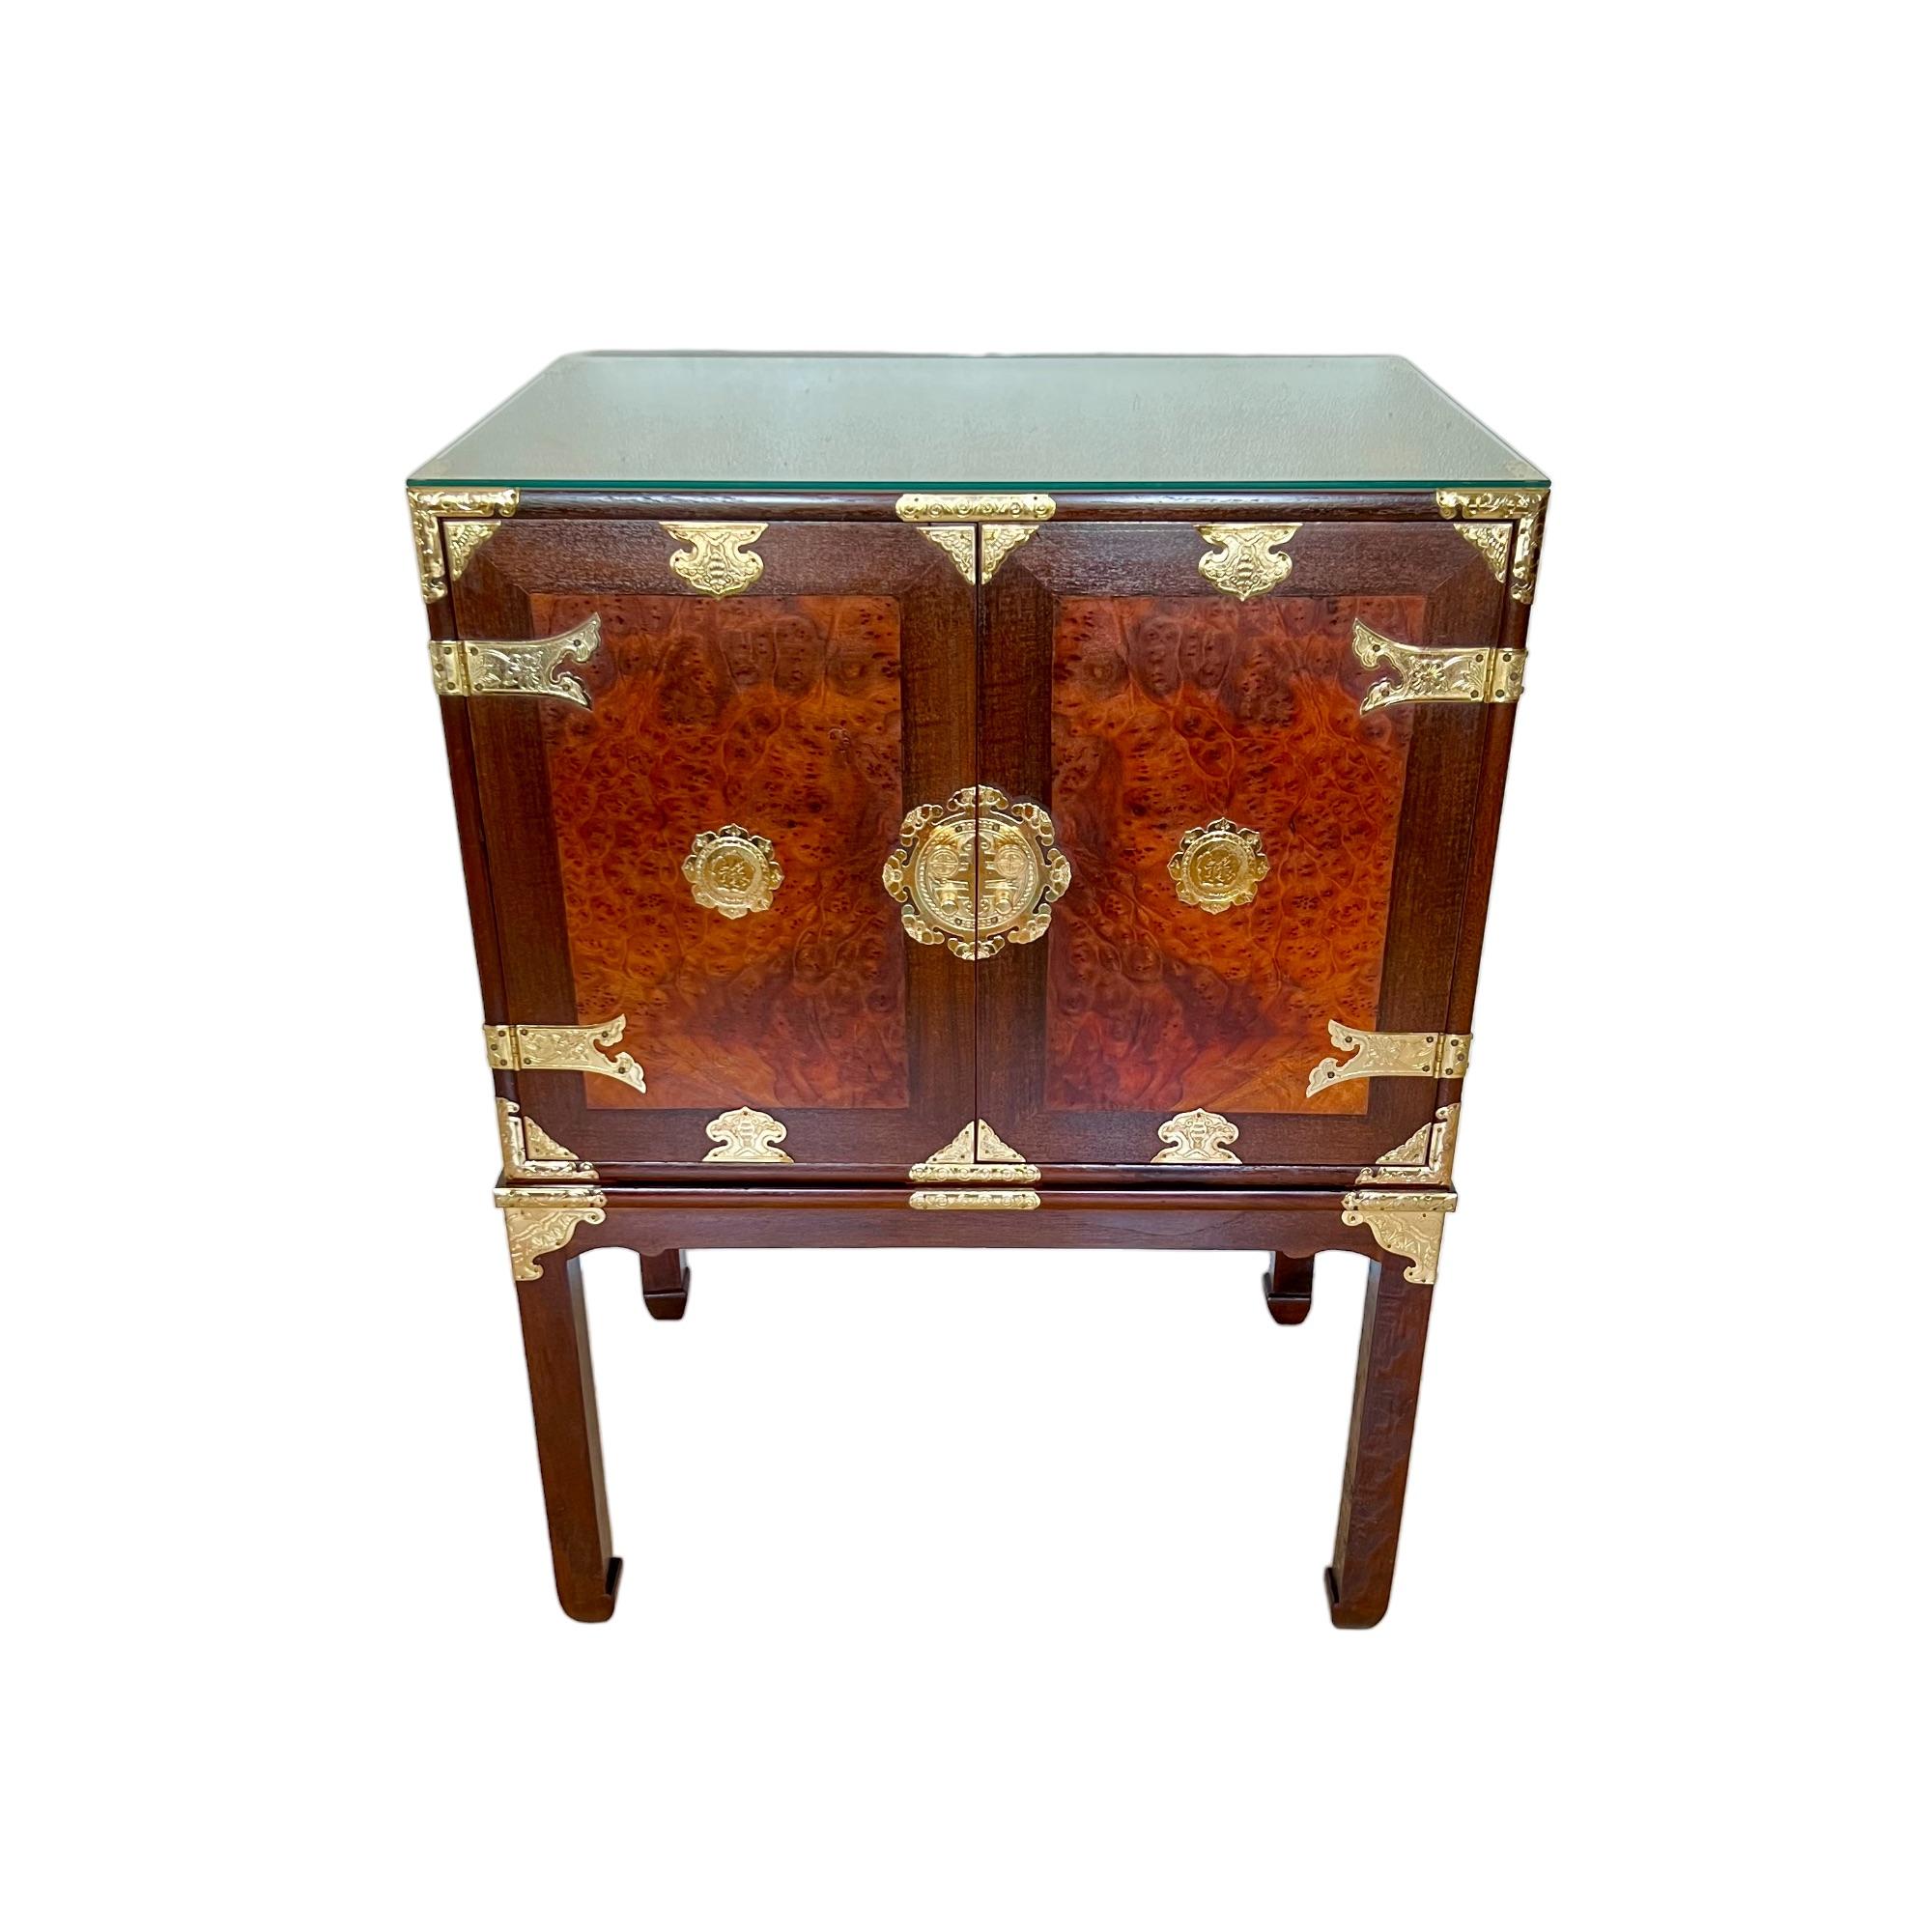 This vintage 1970's Chinese campaign style cabinet on stand is finely crafted of teak and burl elm wood and embellished with etched brass mounts. This chinoiserie storage piece features a spacious two door medallion adorned cabinet with heavy brass